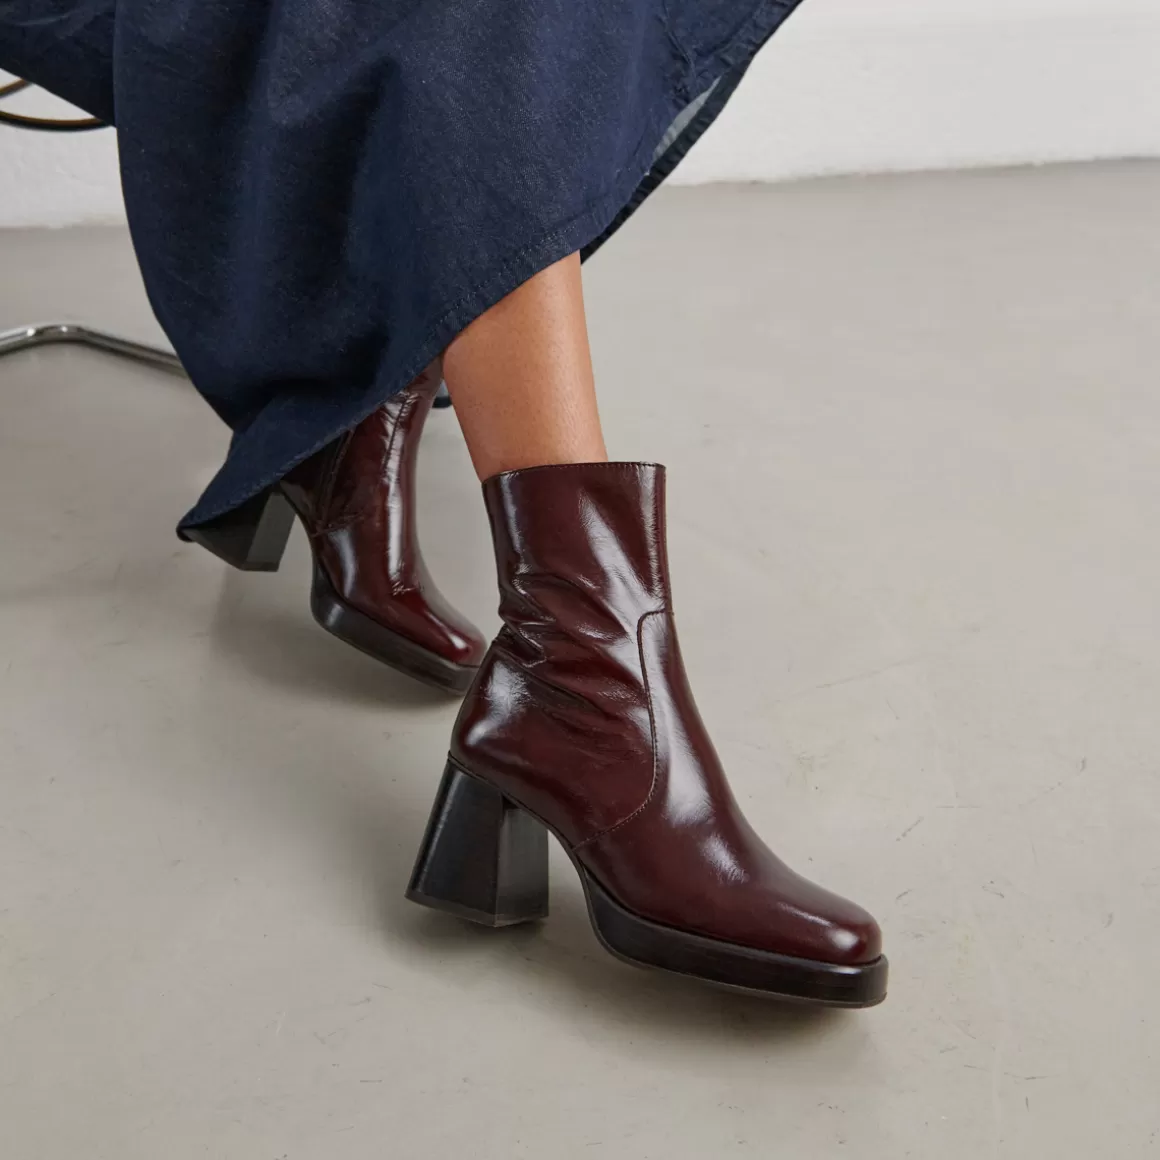 Ankle boots with platforms<Jonak Shop